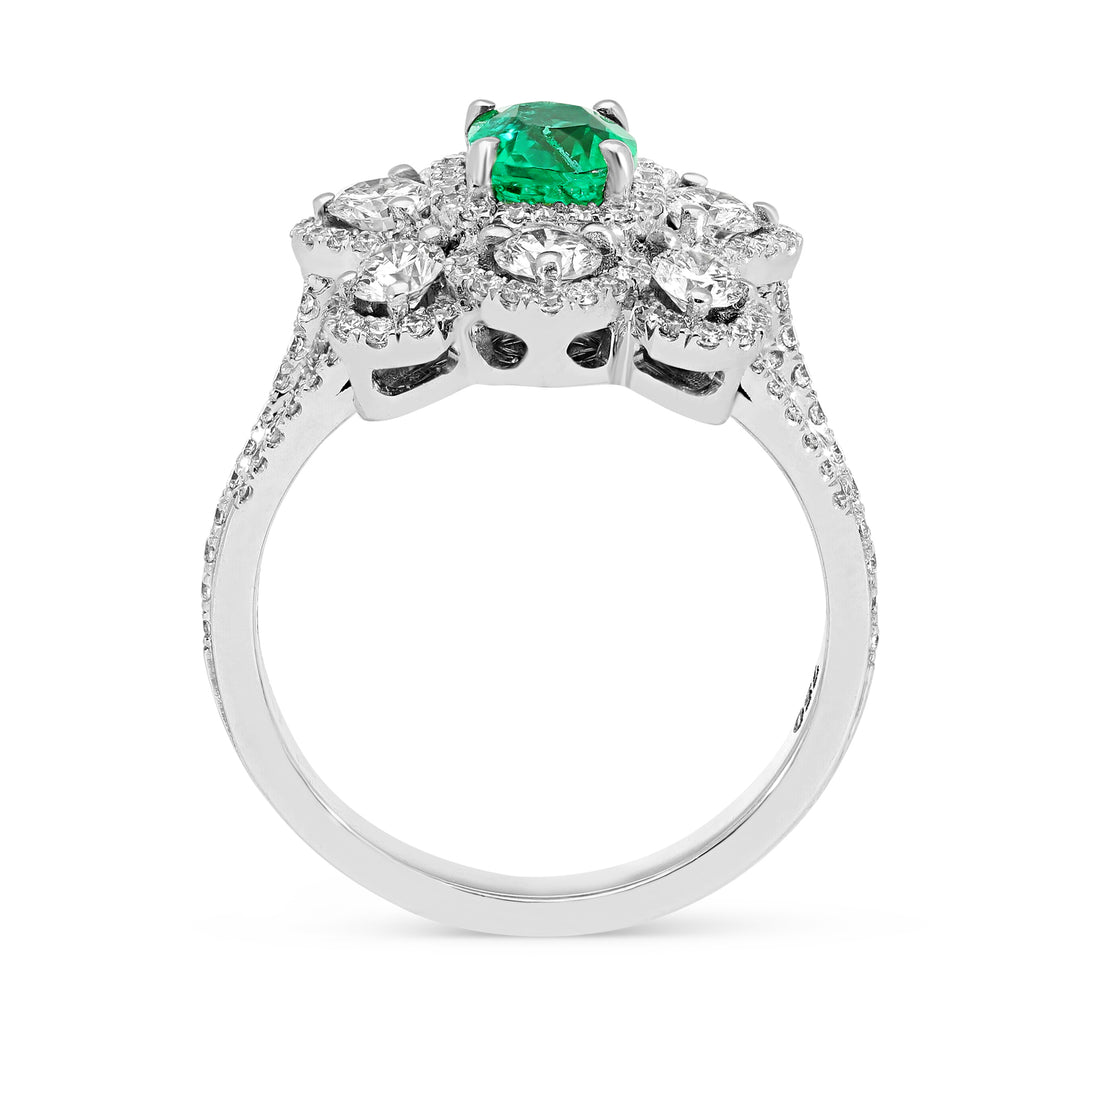 Oval Cut Green Emerald Birthstone Ring Featuring a Diamond Pave Flower Setting